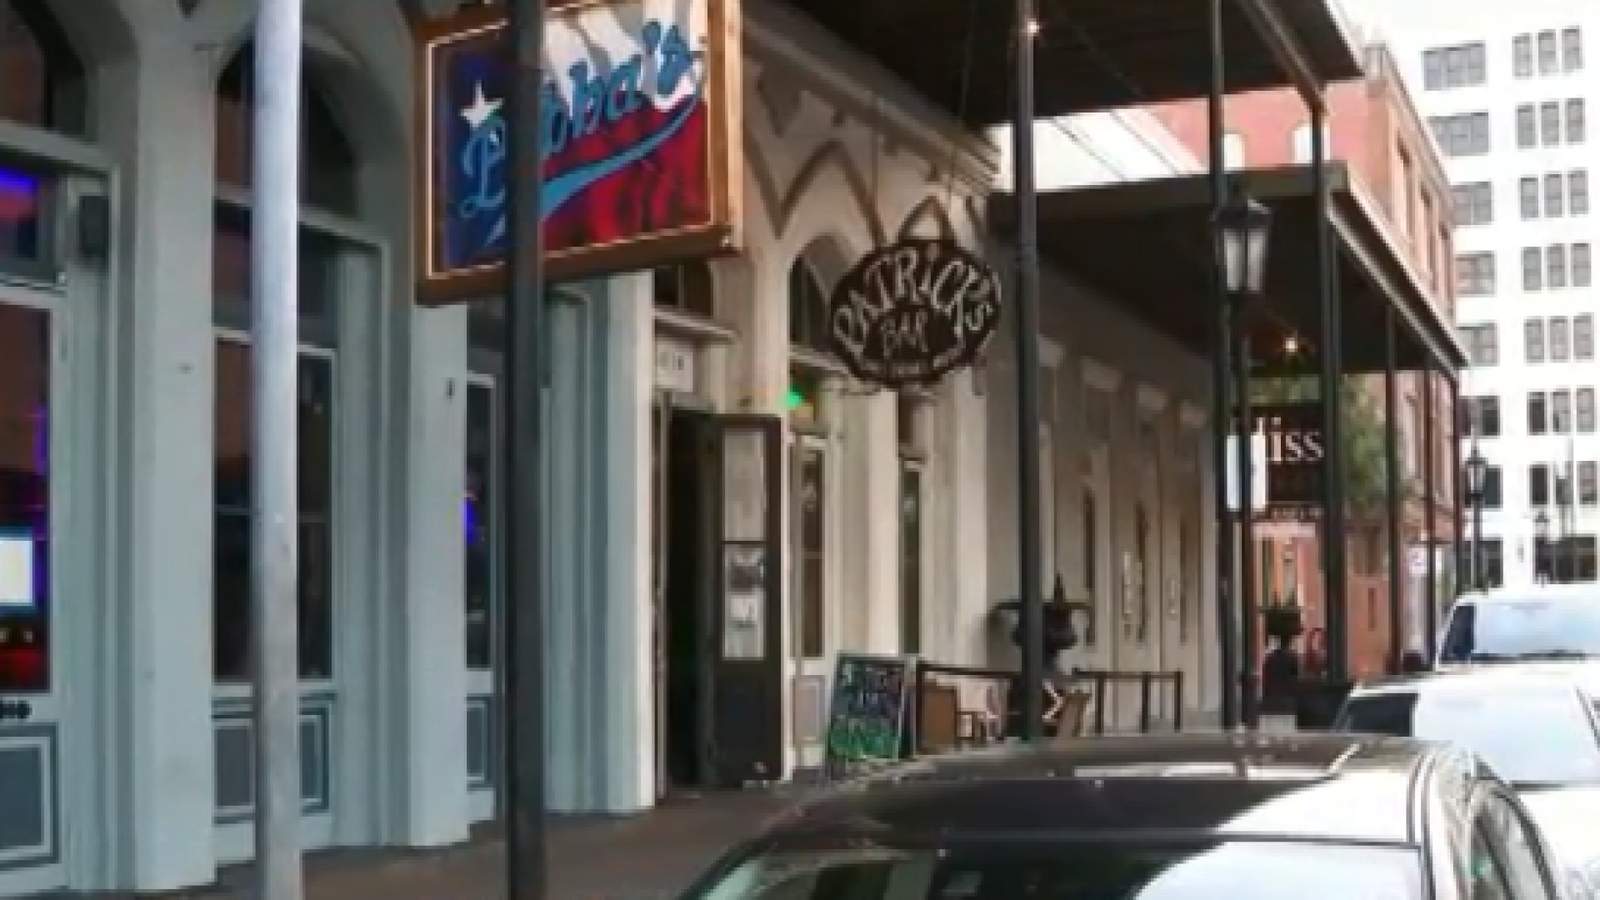 This Galveston establishment is welcoming customers after Gov. Abbott approved the reopening of bars